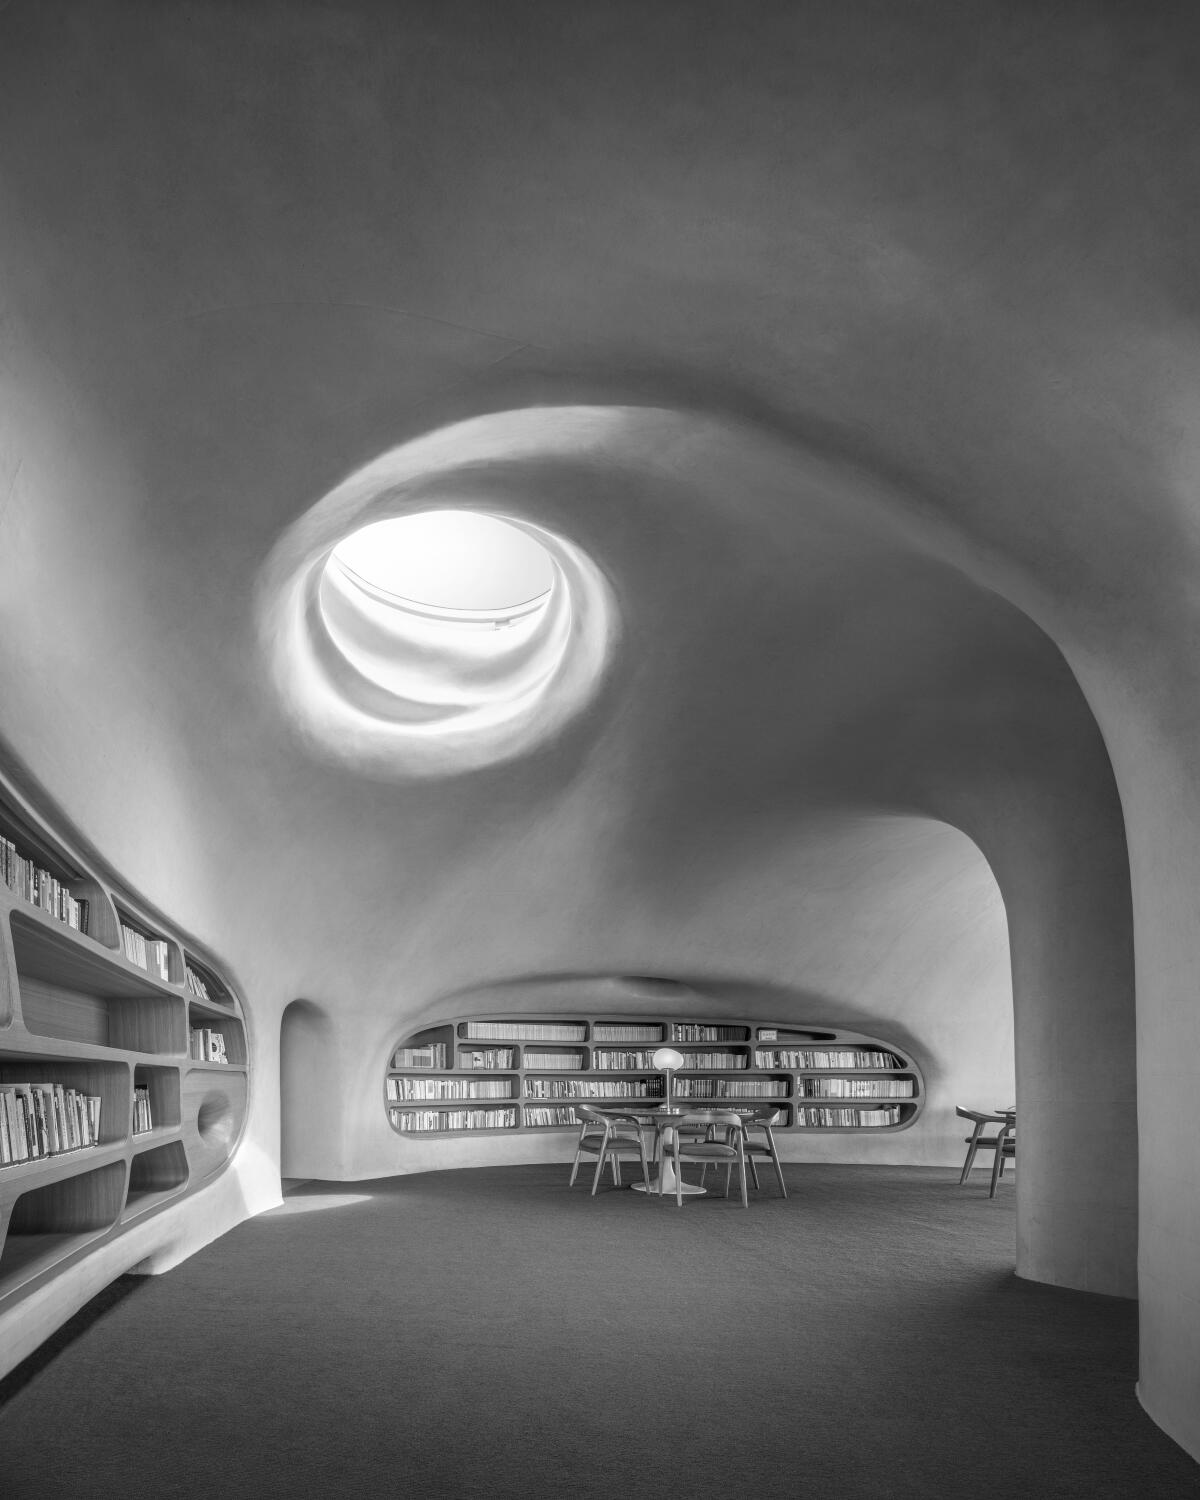 A cavernous interior with whimsical curves and light streaming through a circular opening.